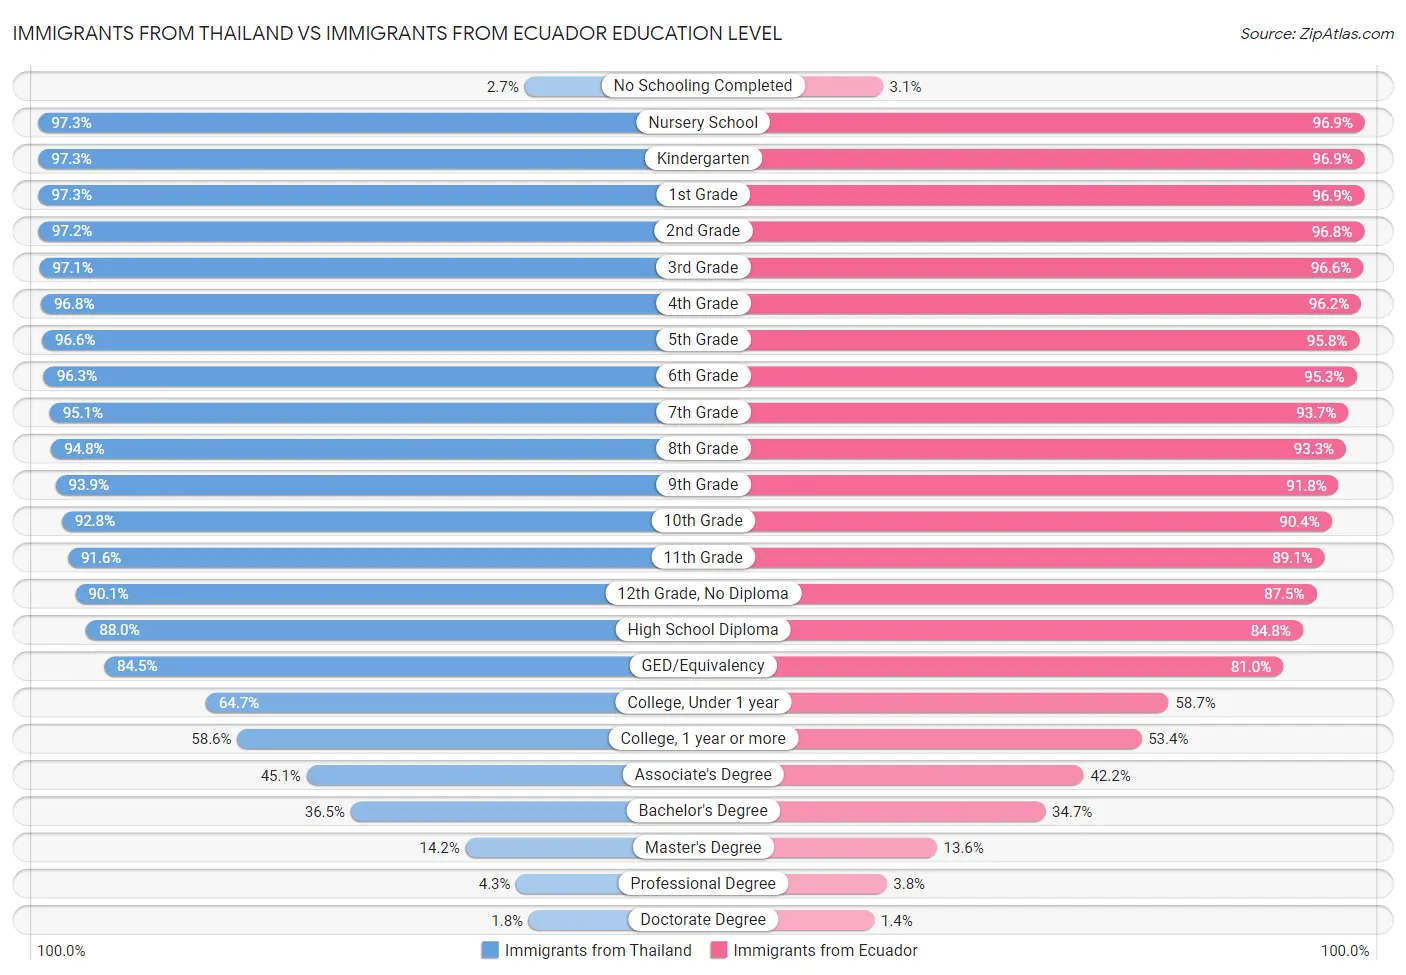 Immigrants from Thailand vs Immigrants from Ecuador Education Level